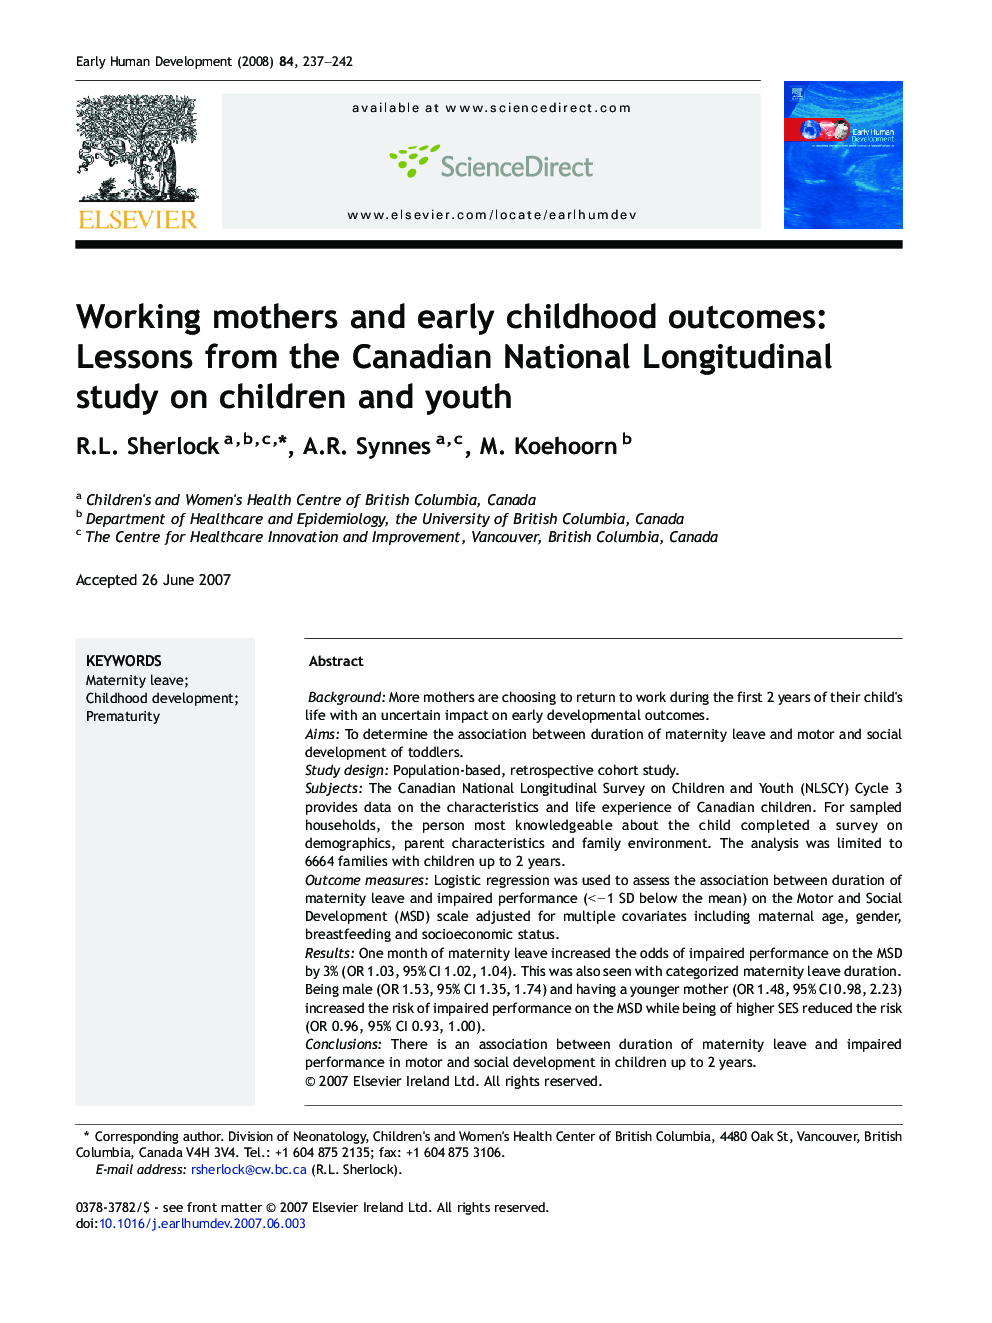 Working mothers and early childhood outcomes: Lessons from the Canadian National Longitudinal study on children and youth